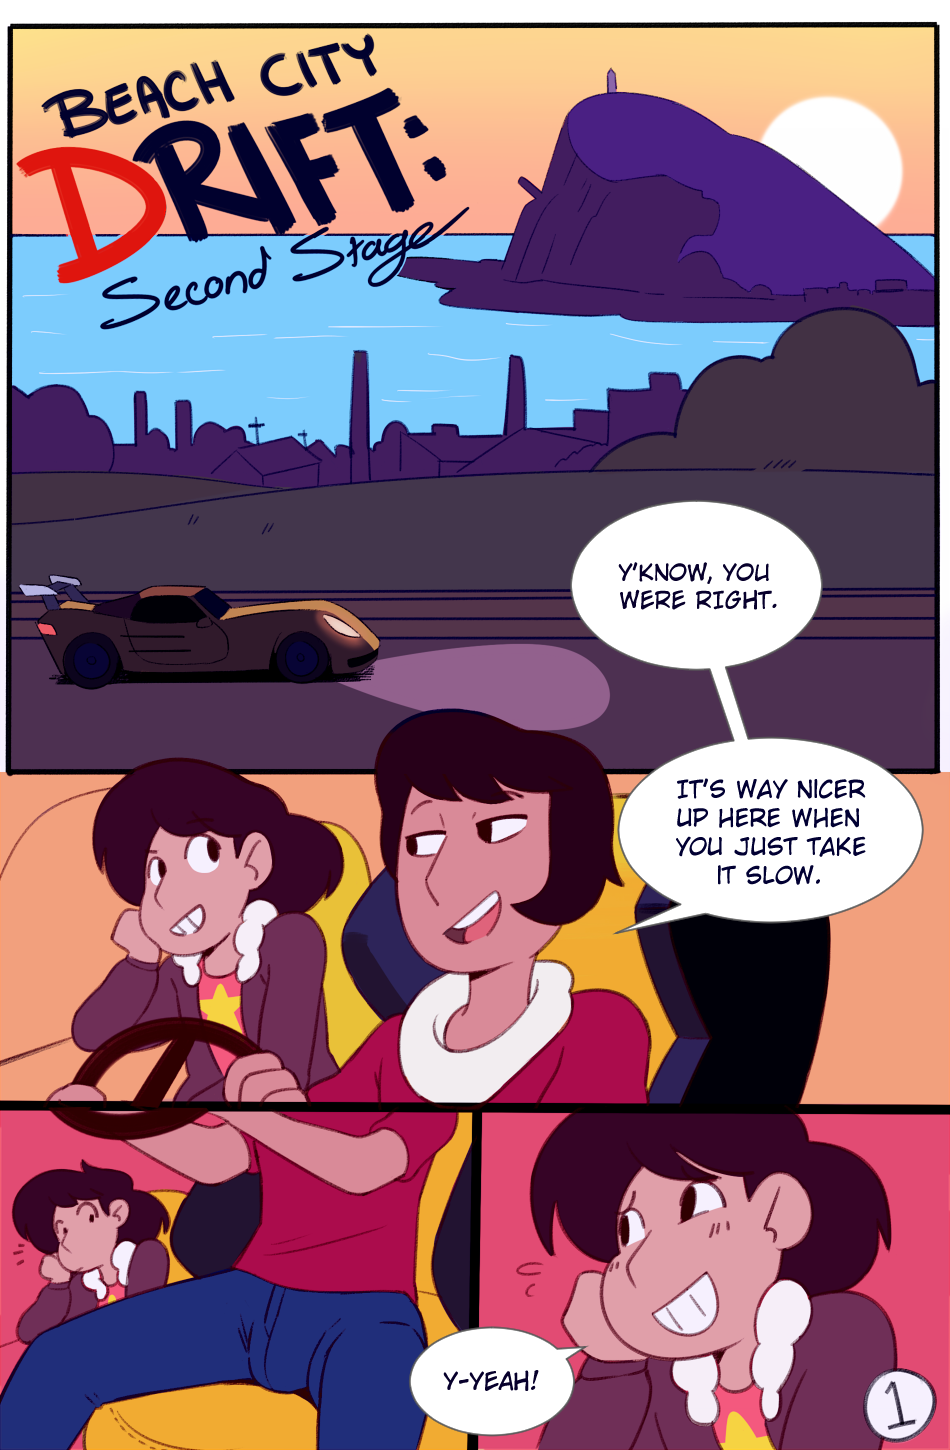 Beach City Drift: Second Stage porn comic picture 1